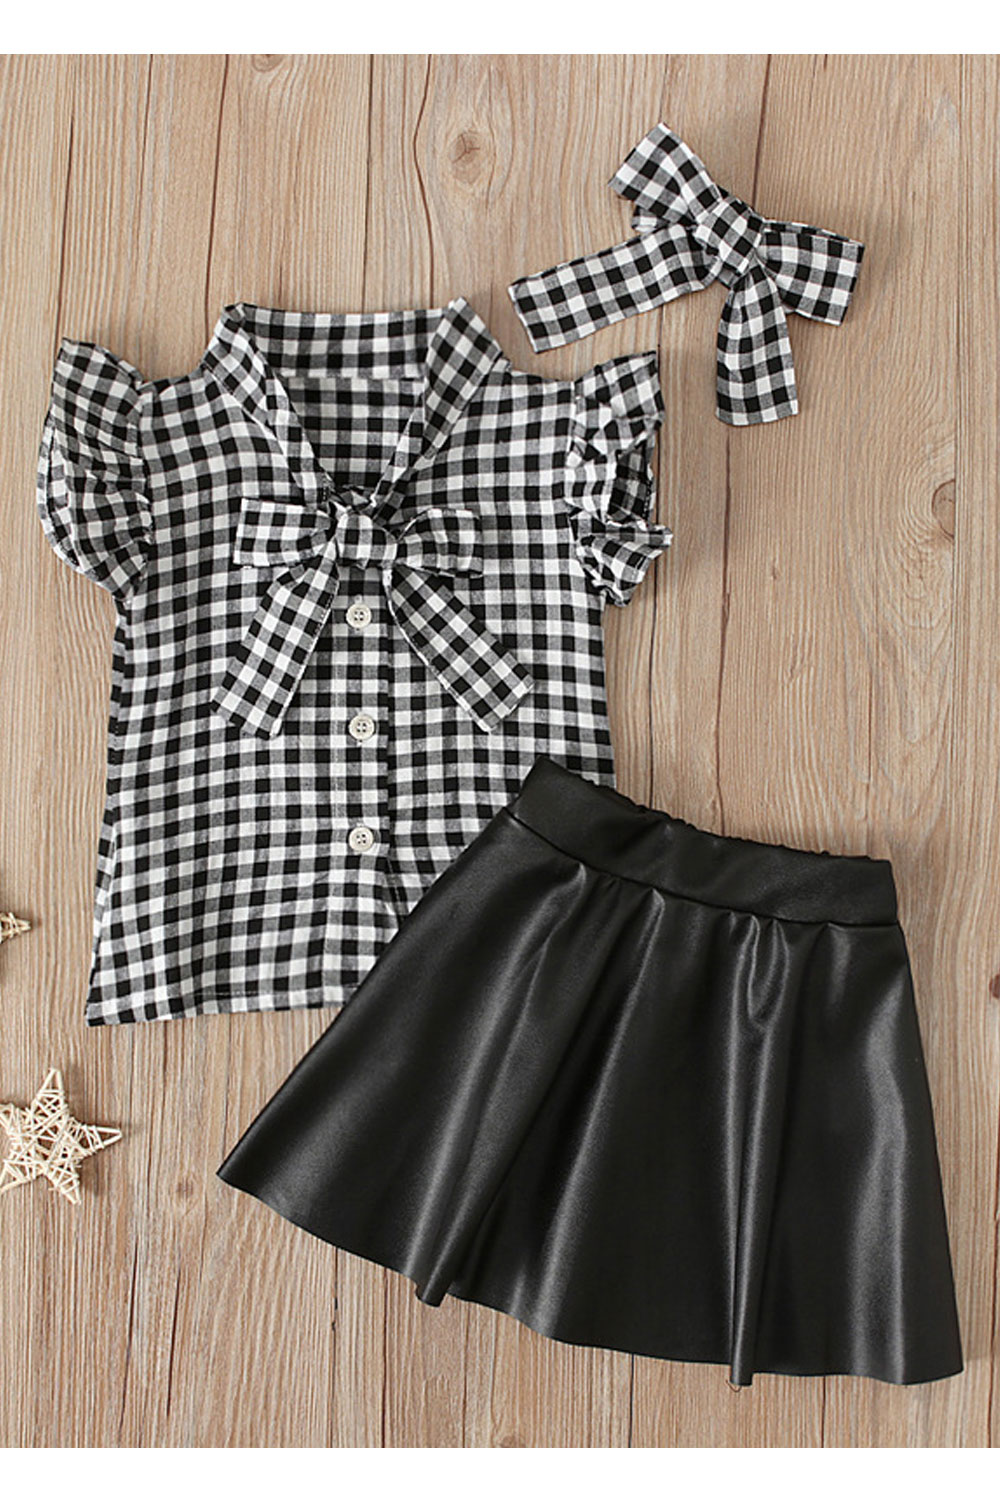 Ketty More Kids Girls New Summer Plaid Small Flying Sleeve Top+ black leather skirt Two-Piece Set